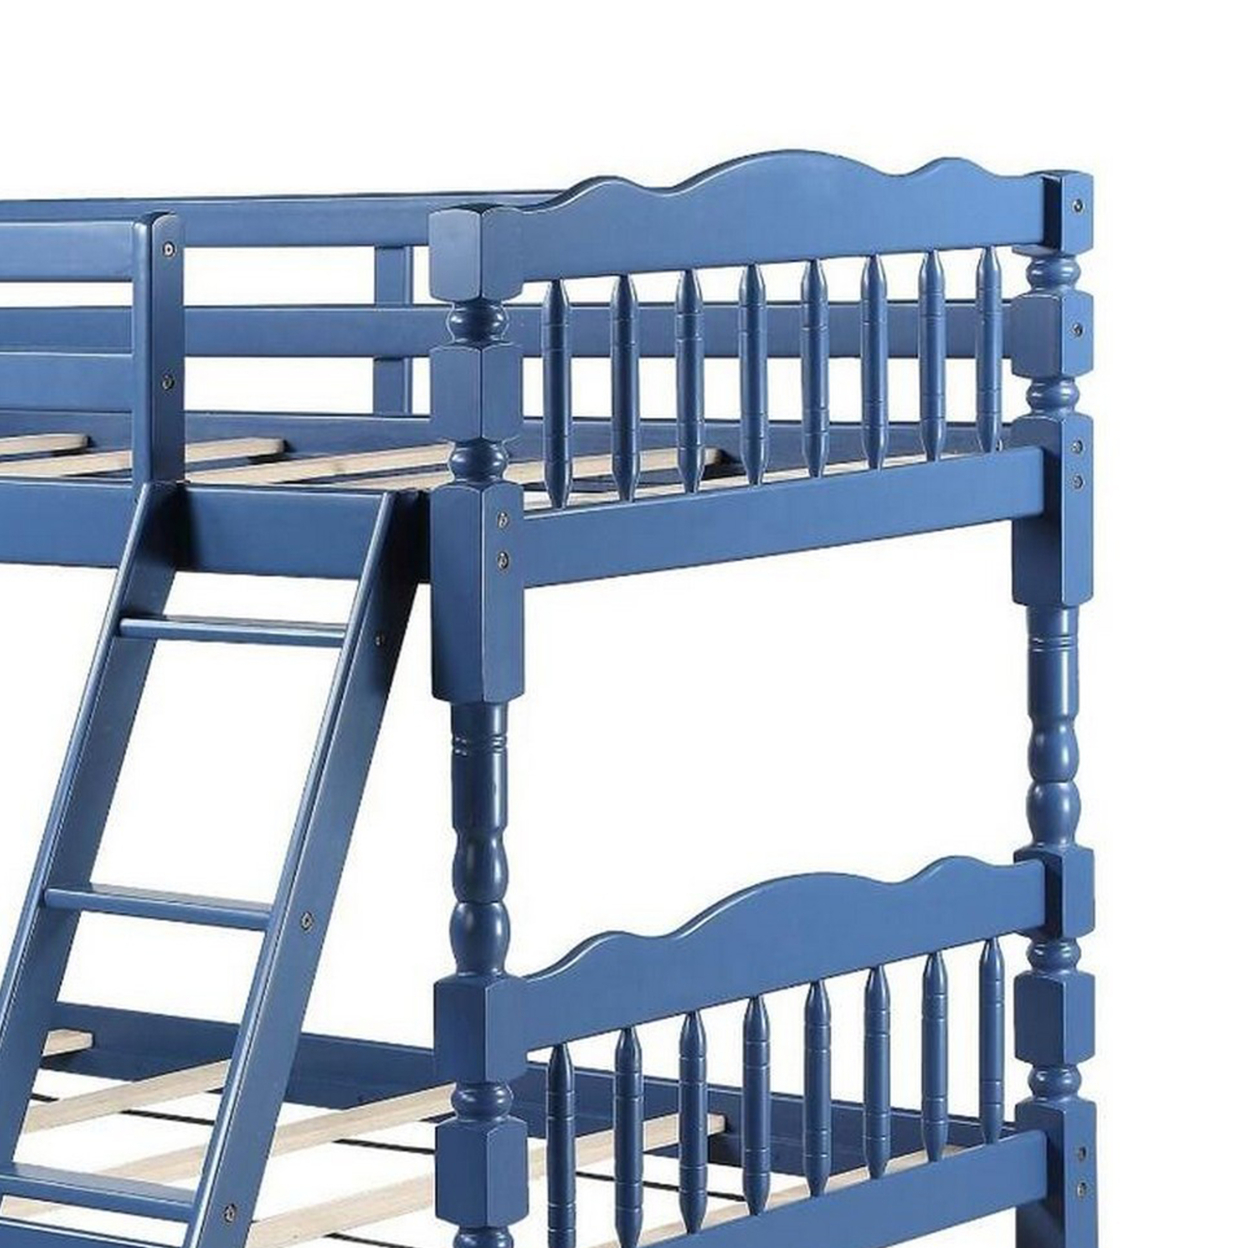 Alice Classic Twin Bunk Bed With Ladder, Guard Rail, Carved Legs, Blue- Saltoro Sherpi